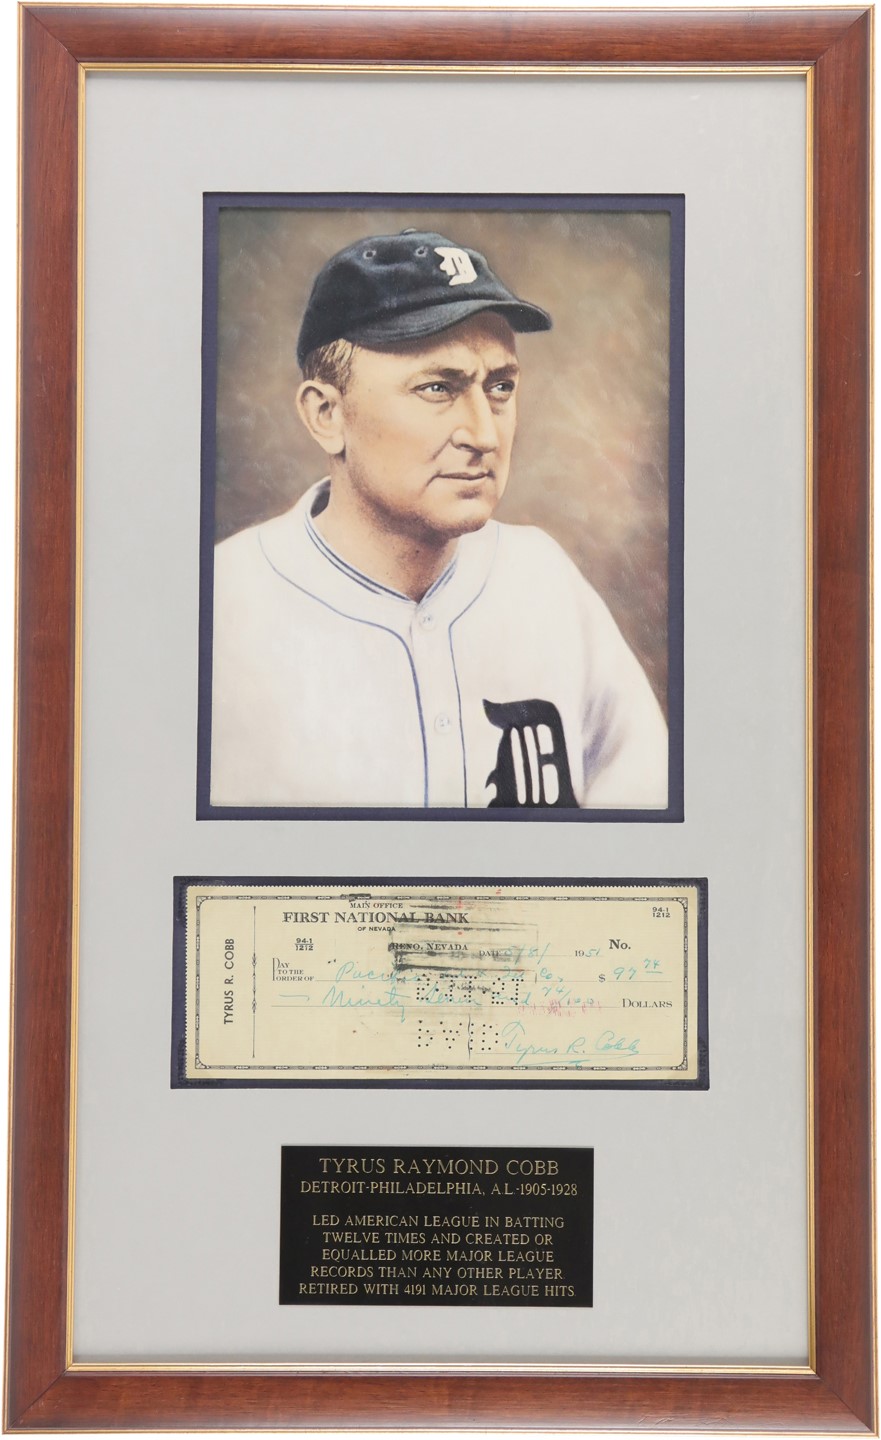 Ty Cobb and Detroit Tigers - 1951 Ty Cobb Signed Bank Check (PSA)